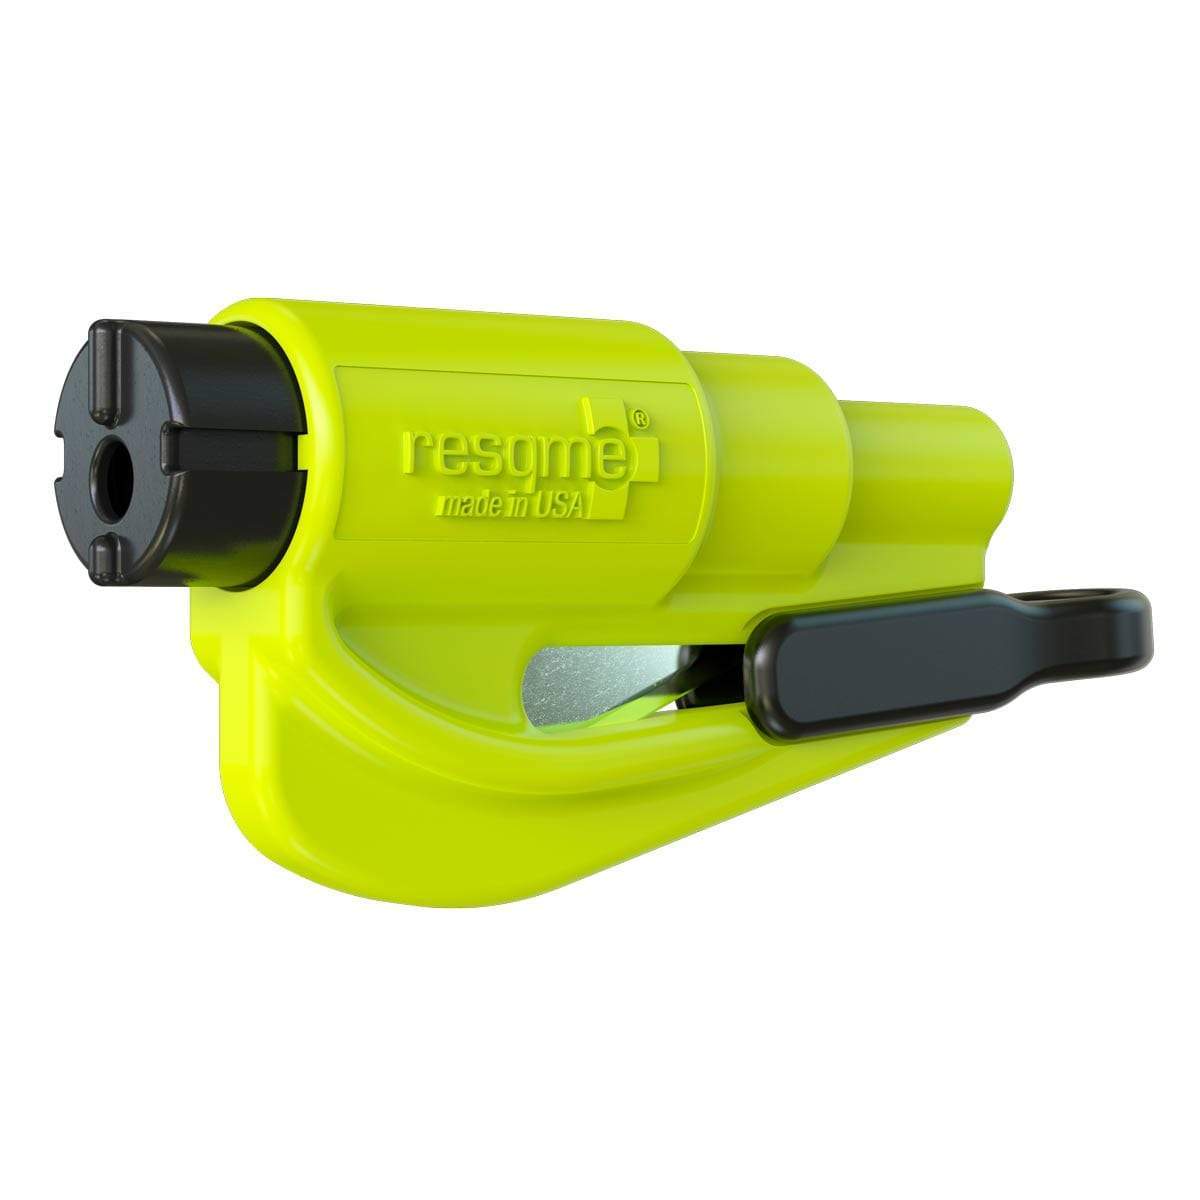 ResQme Rescue and Escape Tool with Glass Breaker and Seat Belt Cutter Rescue Tool Res-Q-Me Tactical Gear Supplier Tactical Distributors Australia